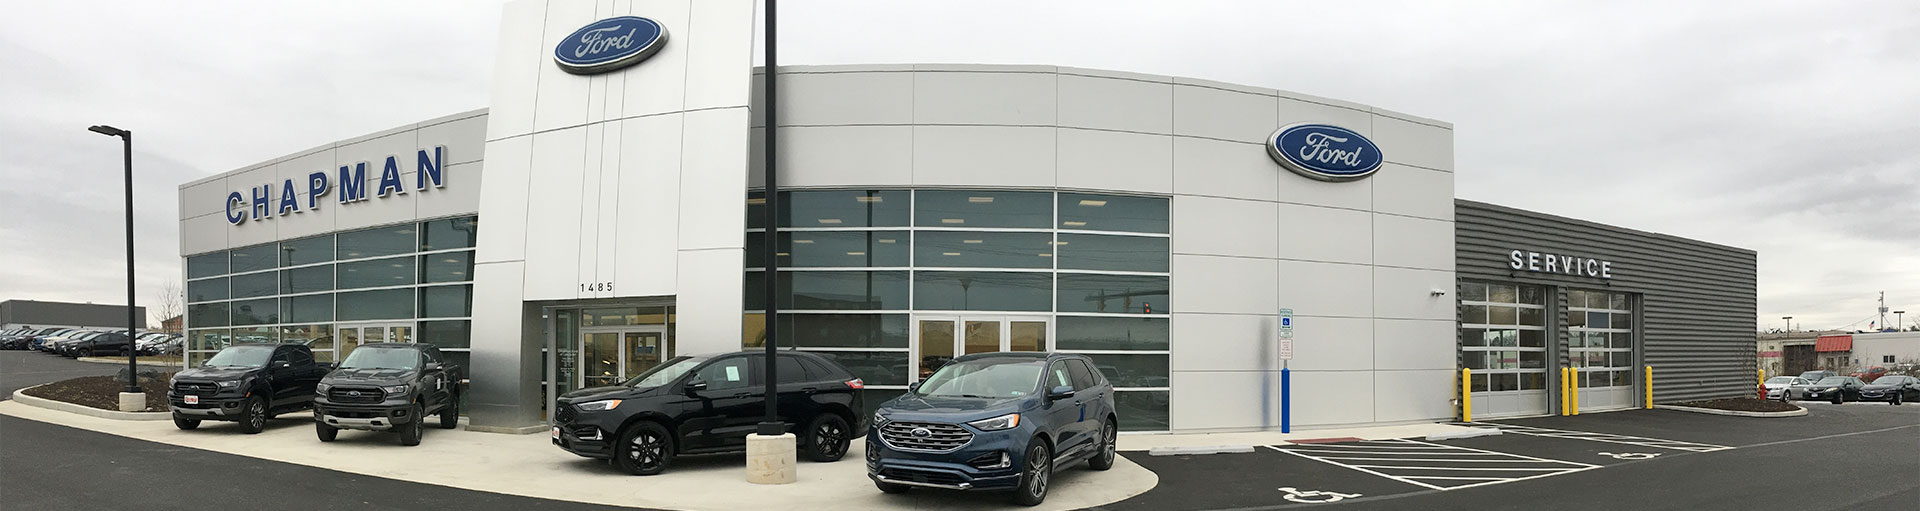 Chapman Ford Service